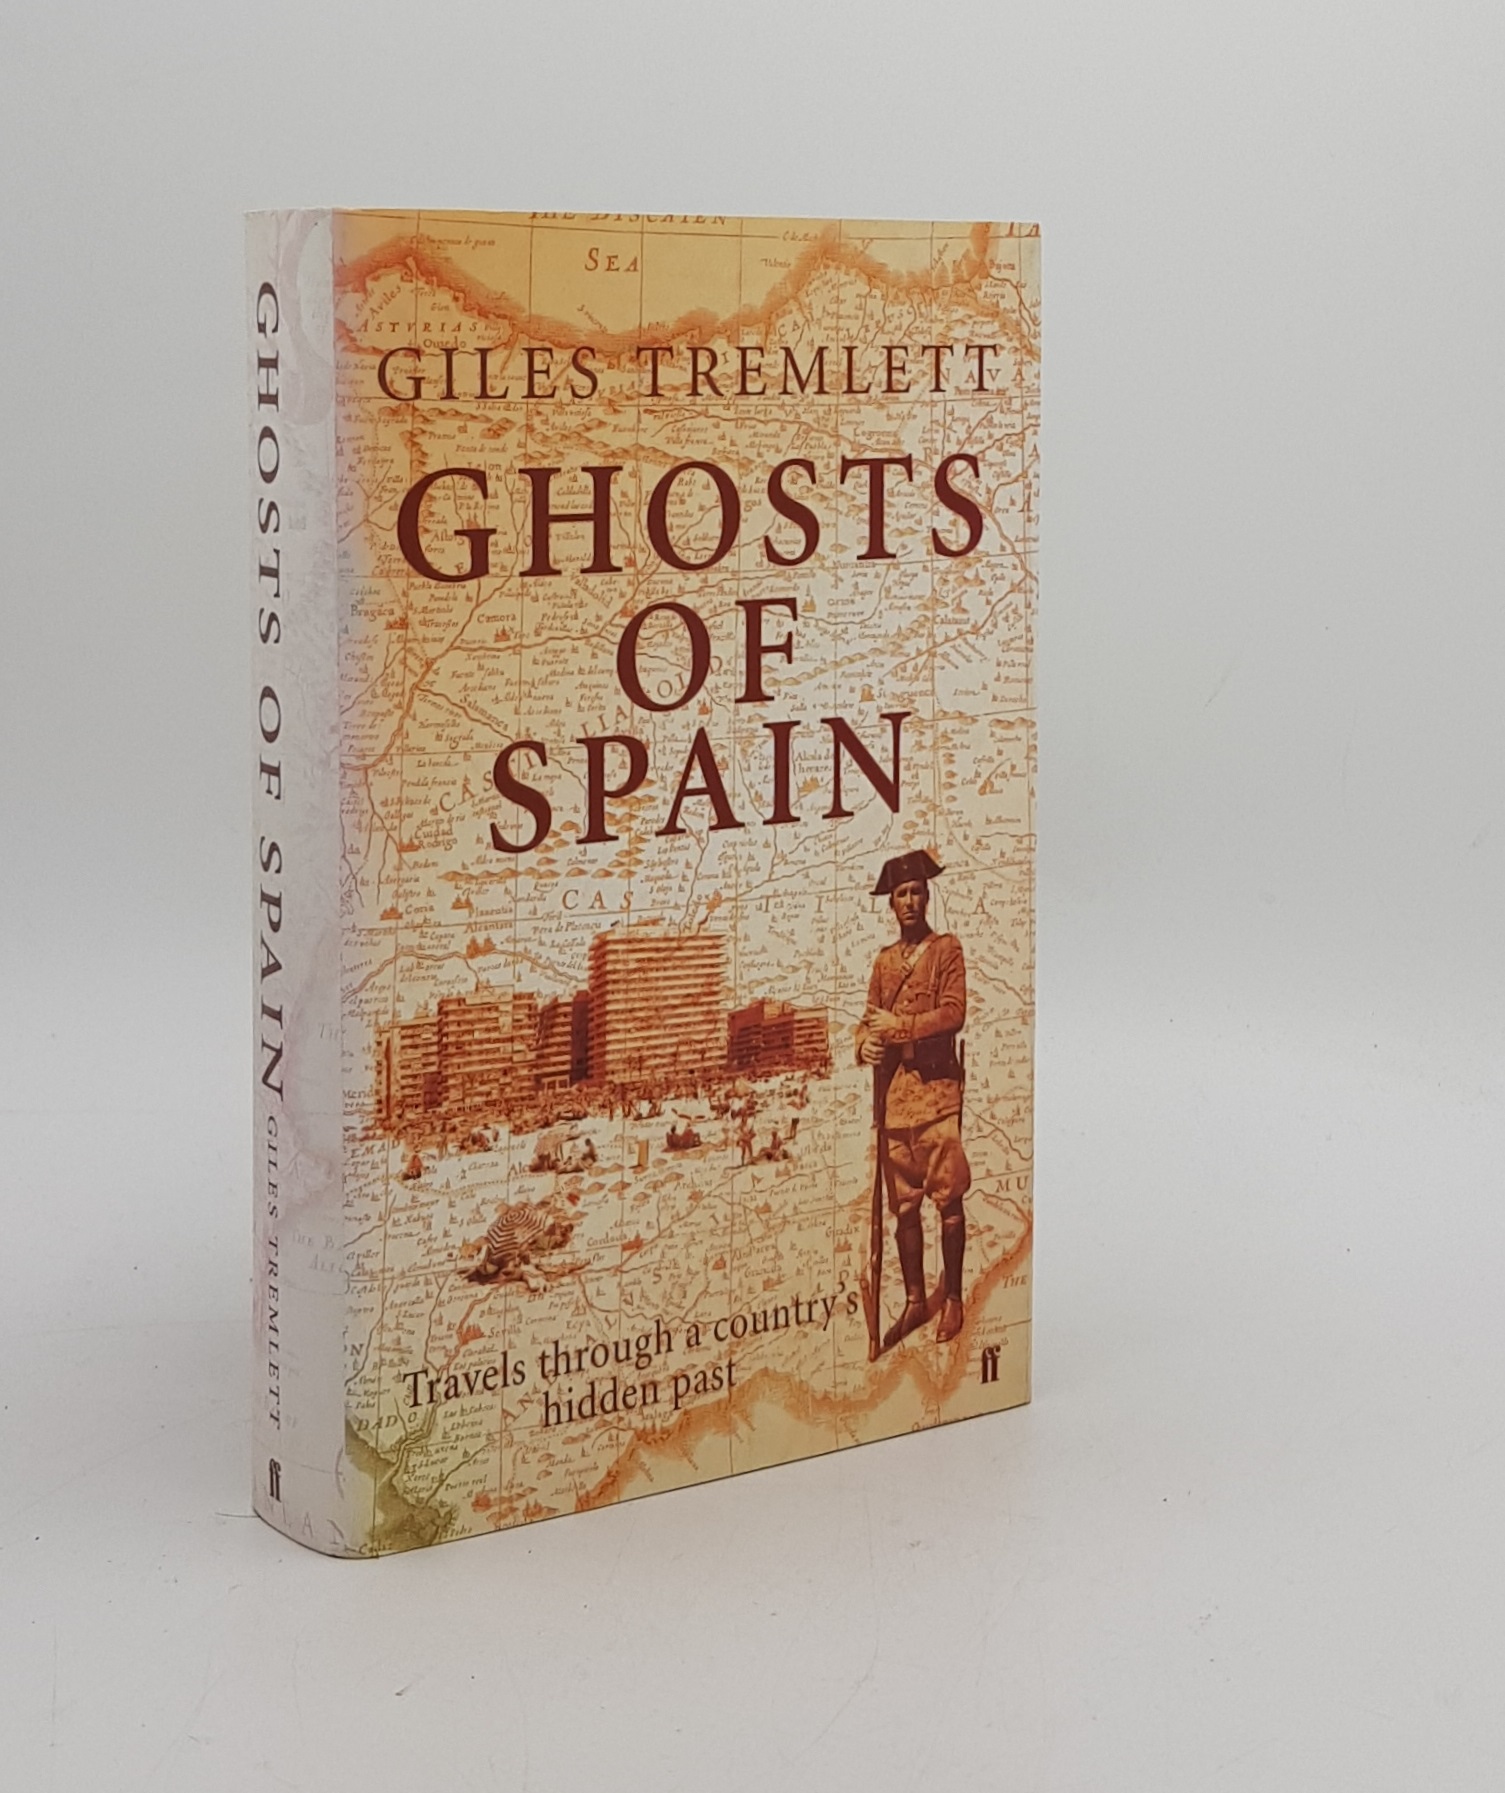 GHOSTS OF SPAIN Travels Through a Country's Hidden Past - TREMLETT Giles